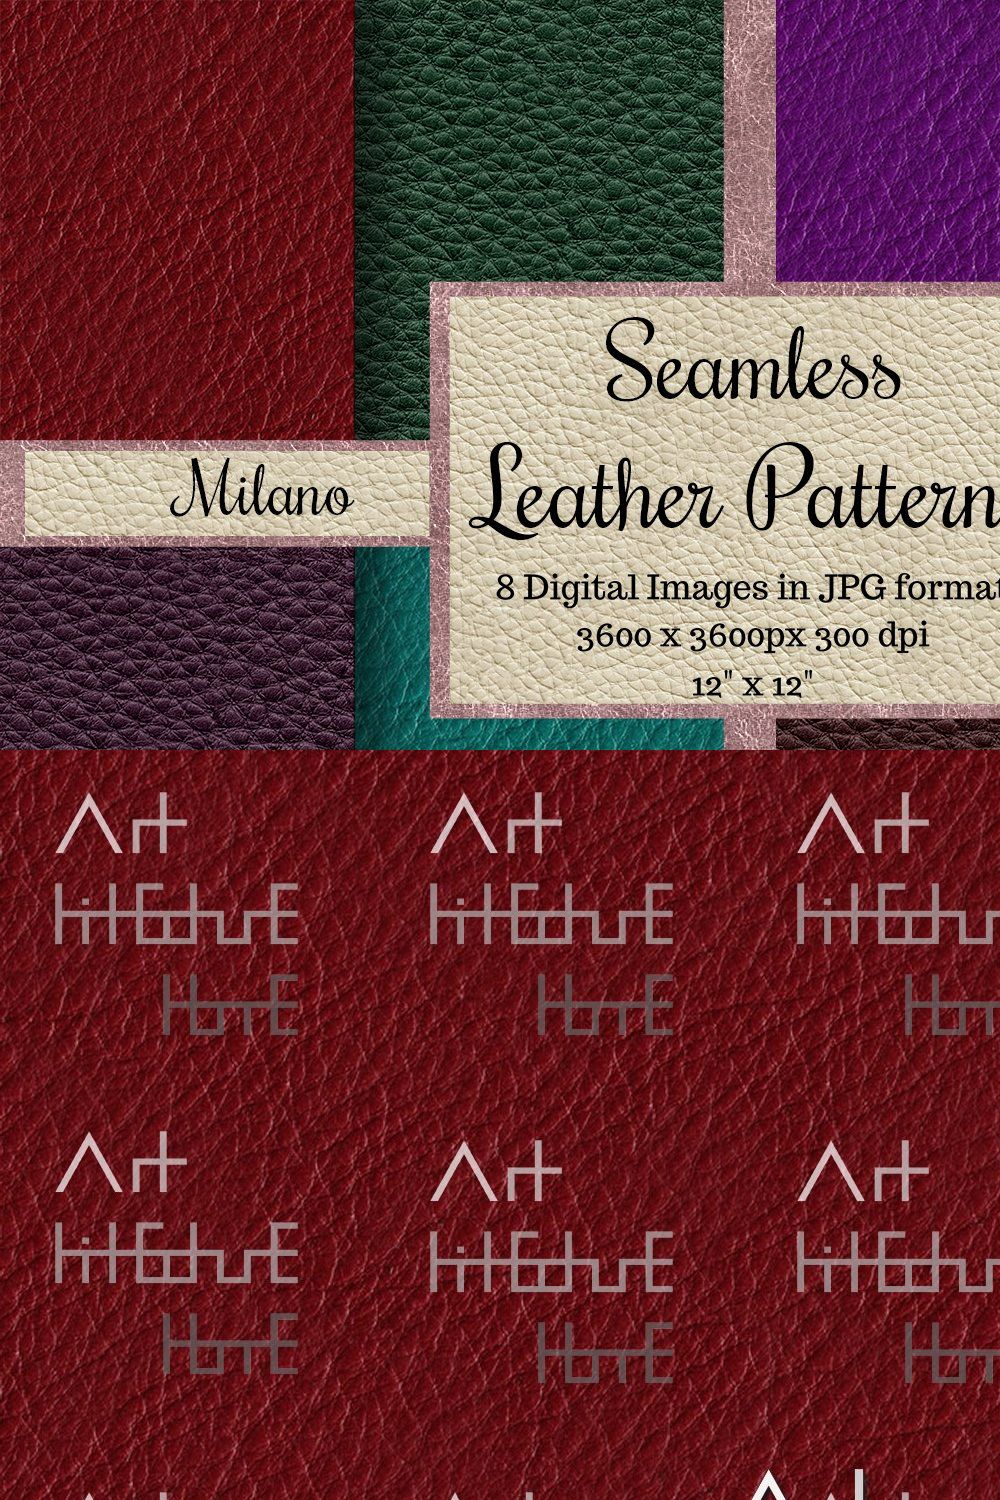 Seamless Leather Patterns - Milano pinterest preview image.